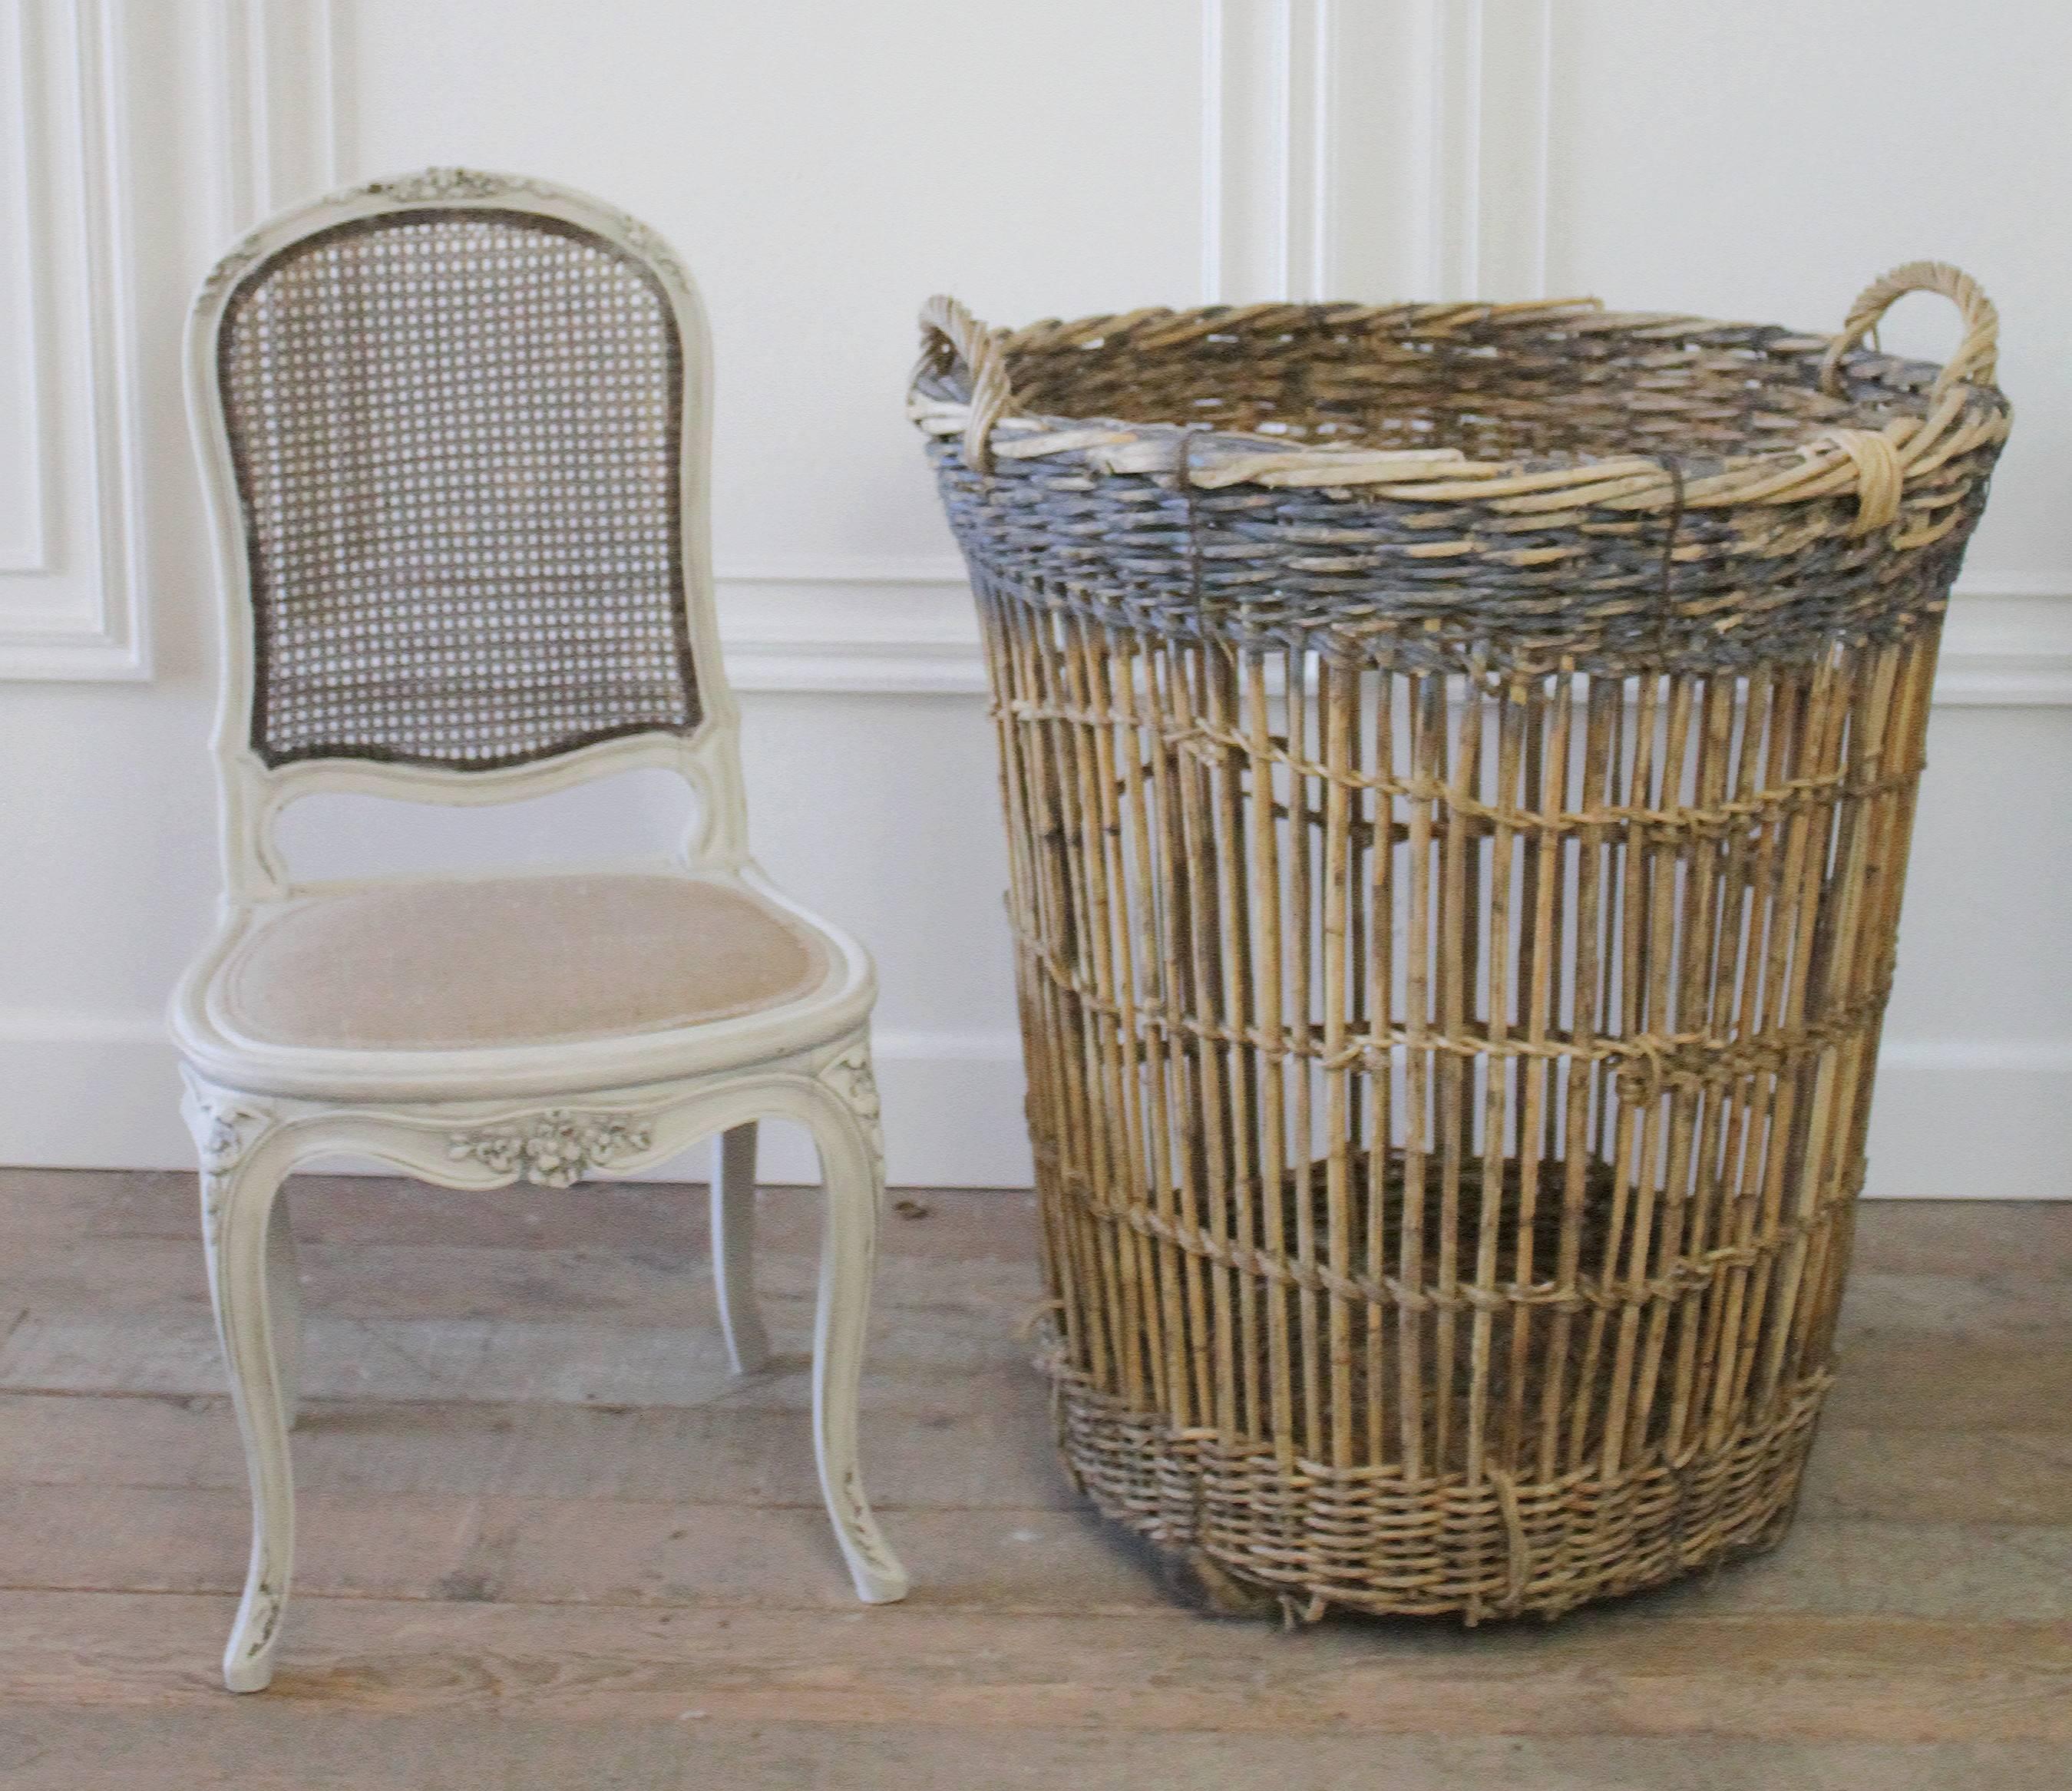 We have just 1 left. Large French harvest baskets made of woven willow and wood from the Champagne region of Burgundy, France. Beautifully woven with a painted rim, in a faded soft French cornflower blue color. The finish is warm and rich. One sits